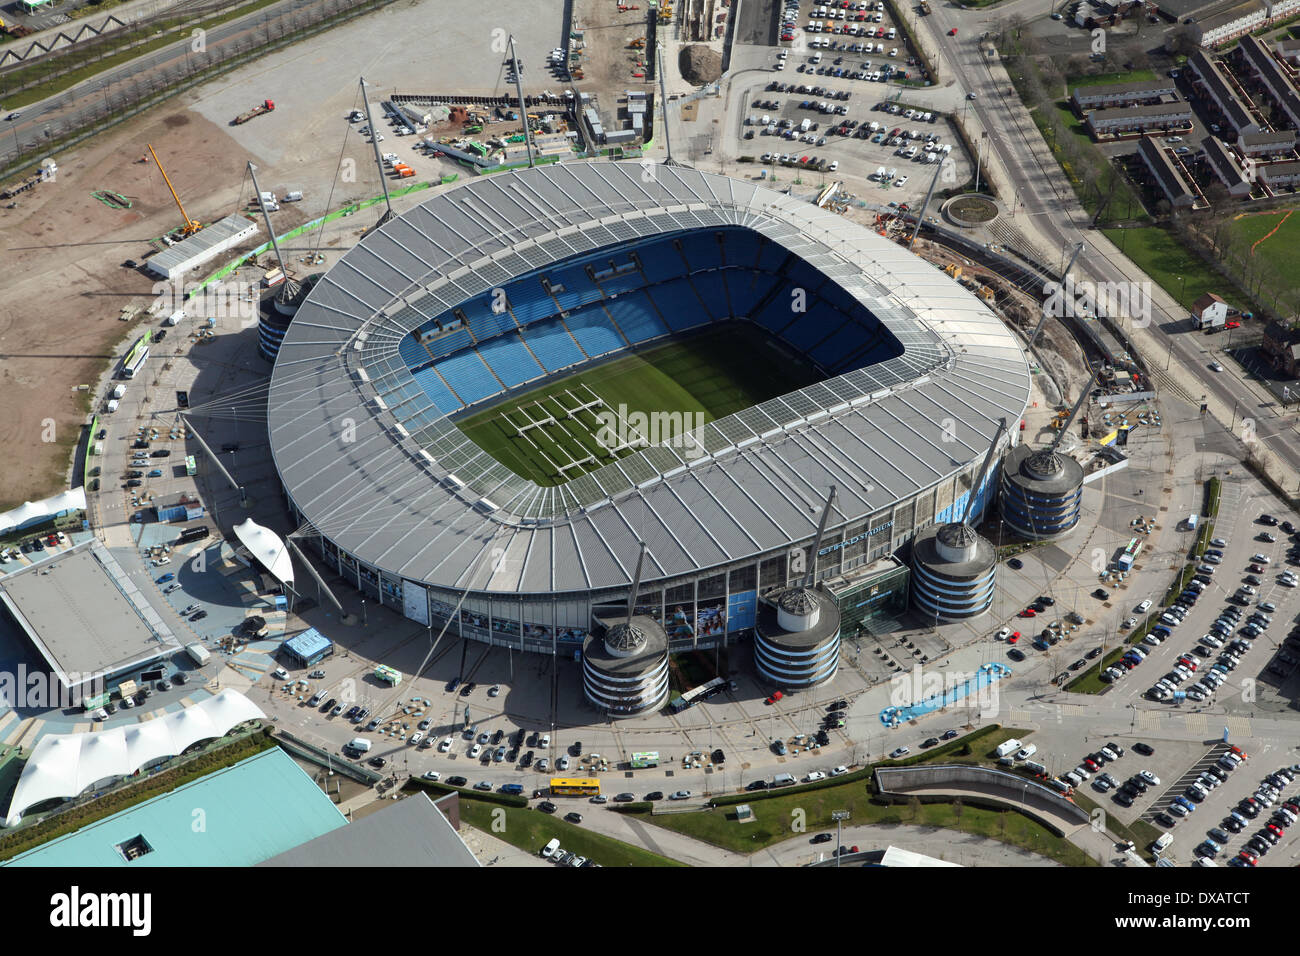 aerial view of the Etihad football stadium in Manchester. Home of Manchester City football club. Stock Photo